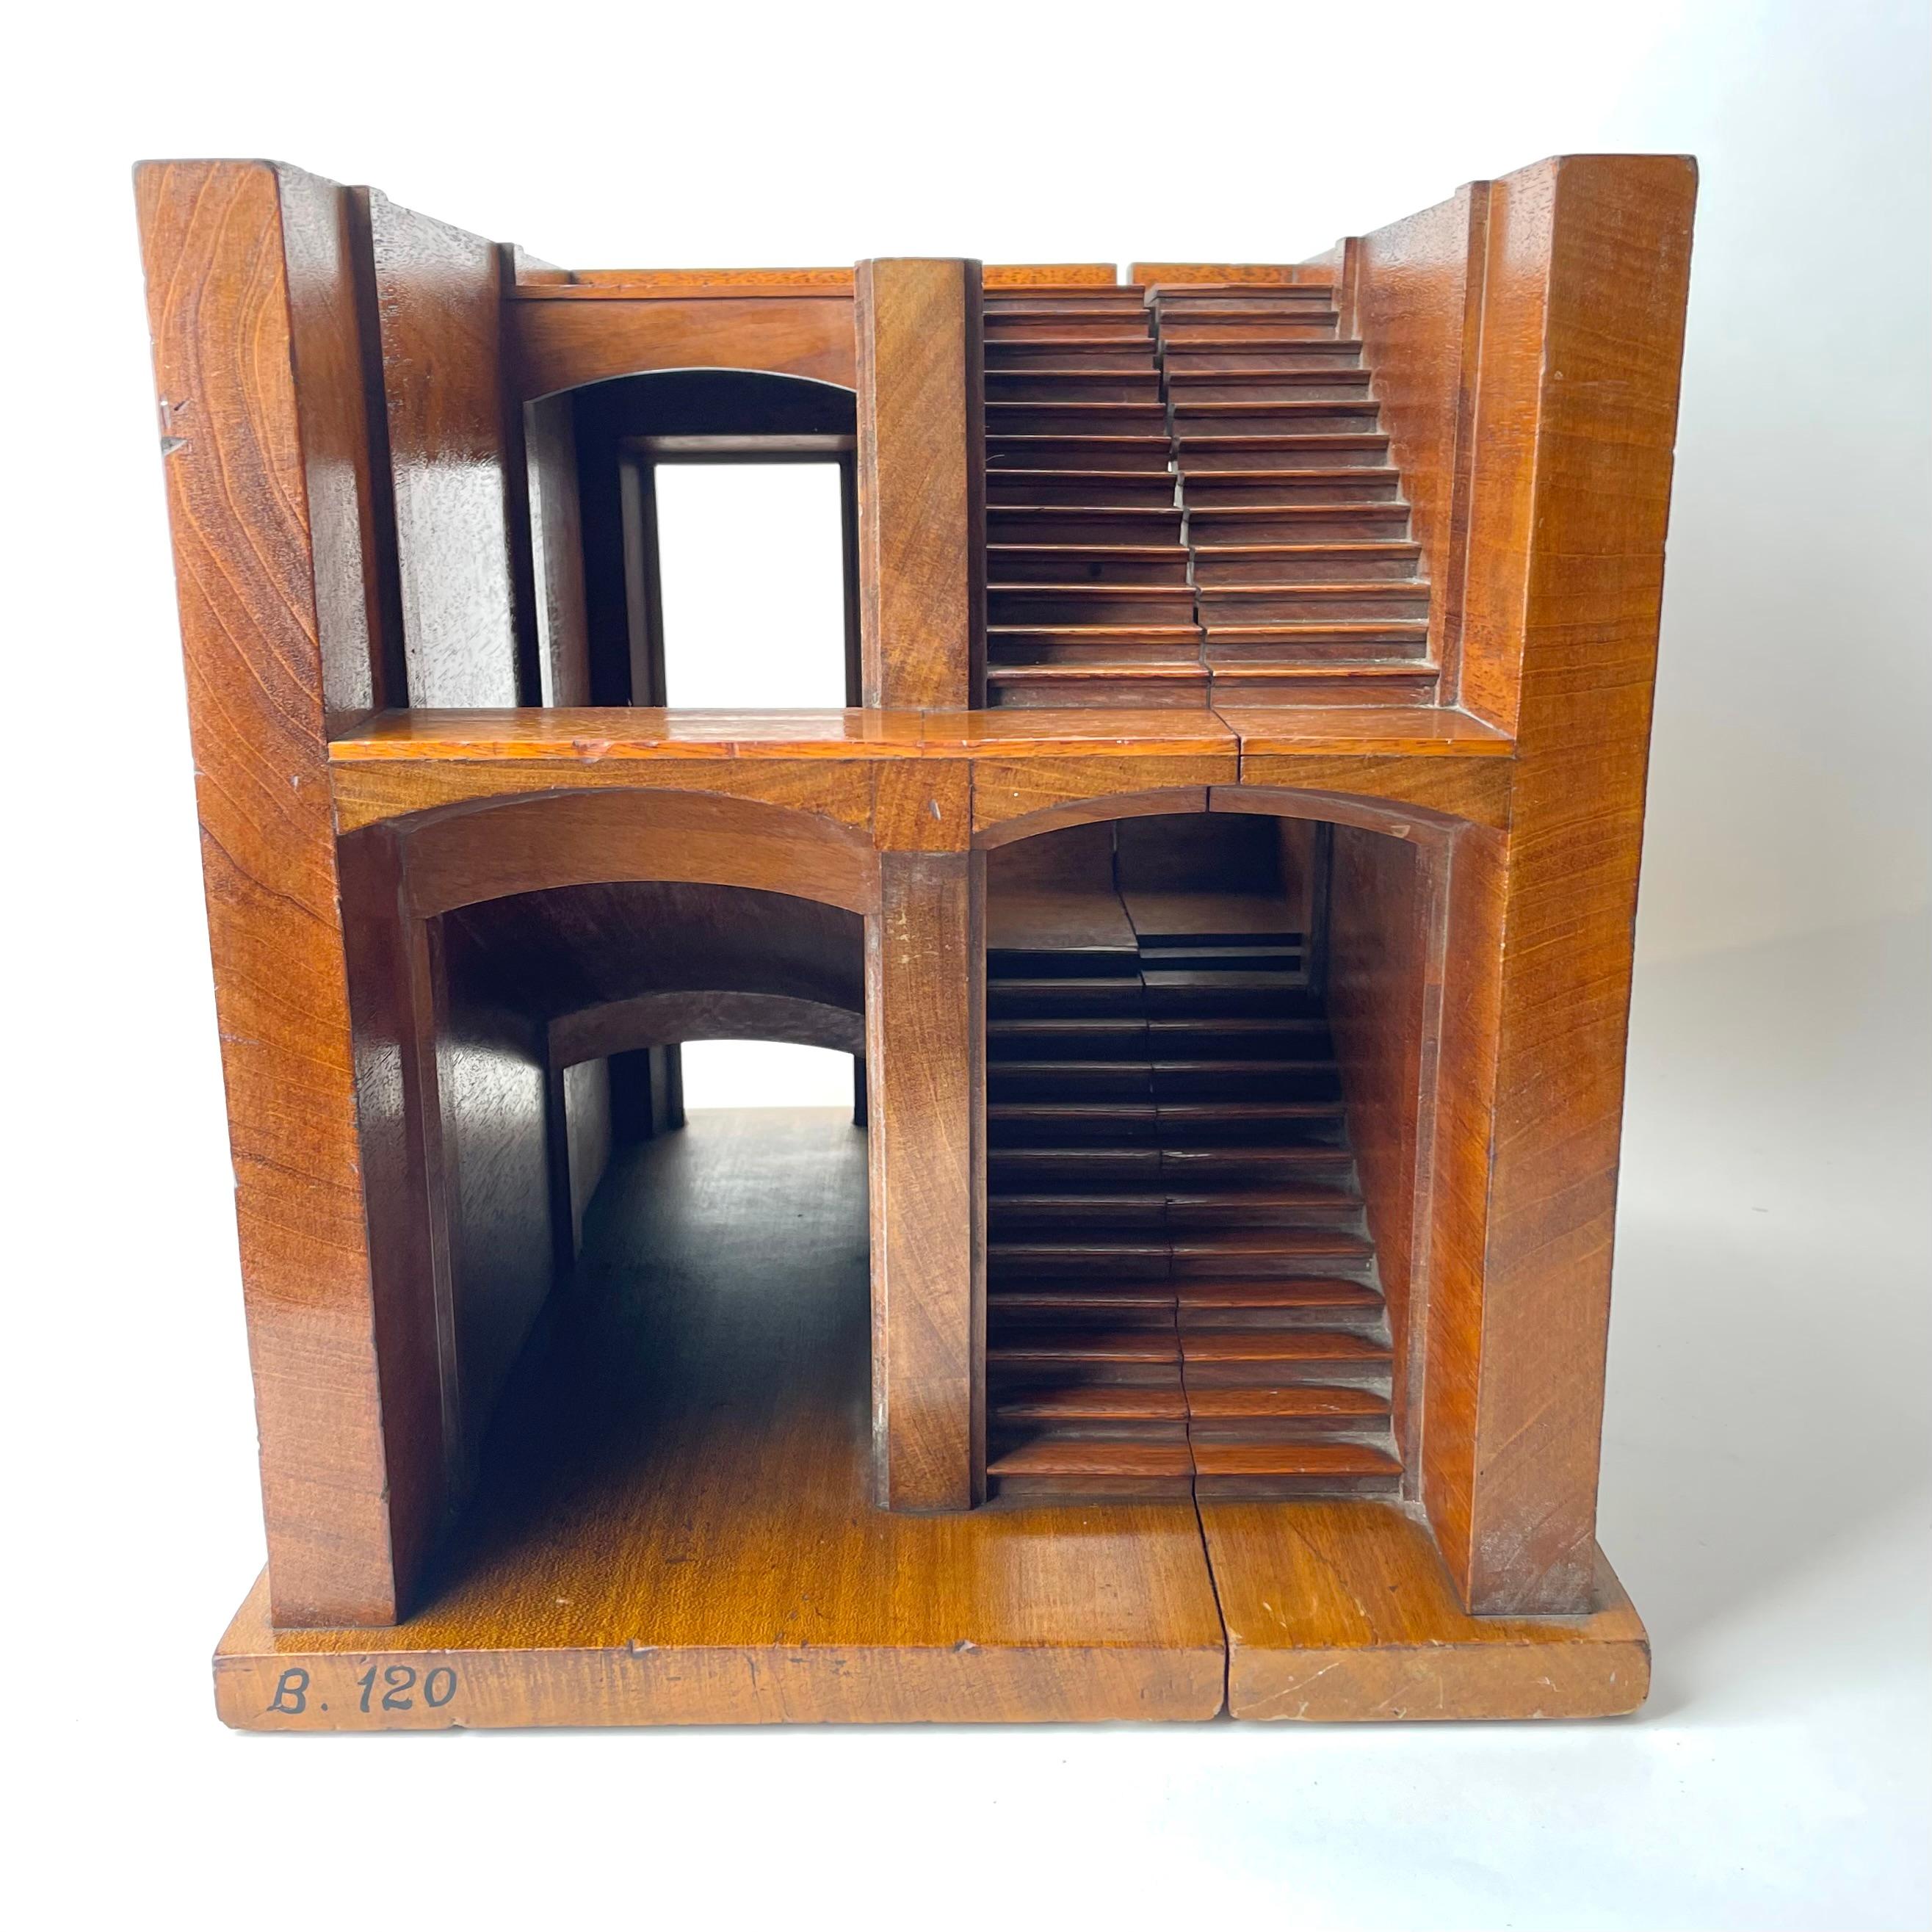 Mahogany Staircase Section Architectural Model, Late 19th/Early 20th C England. For Sale 4